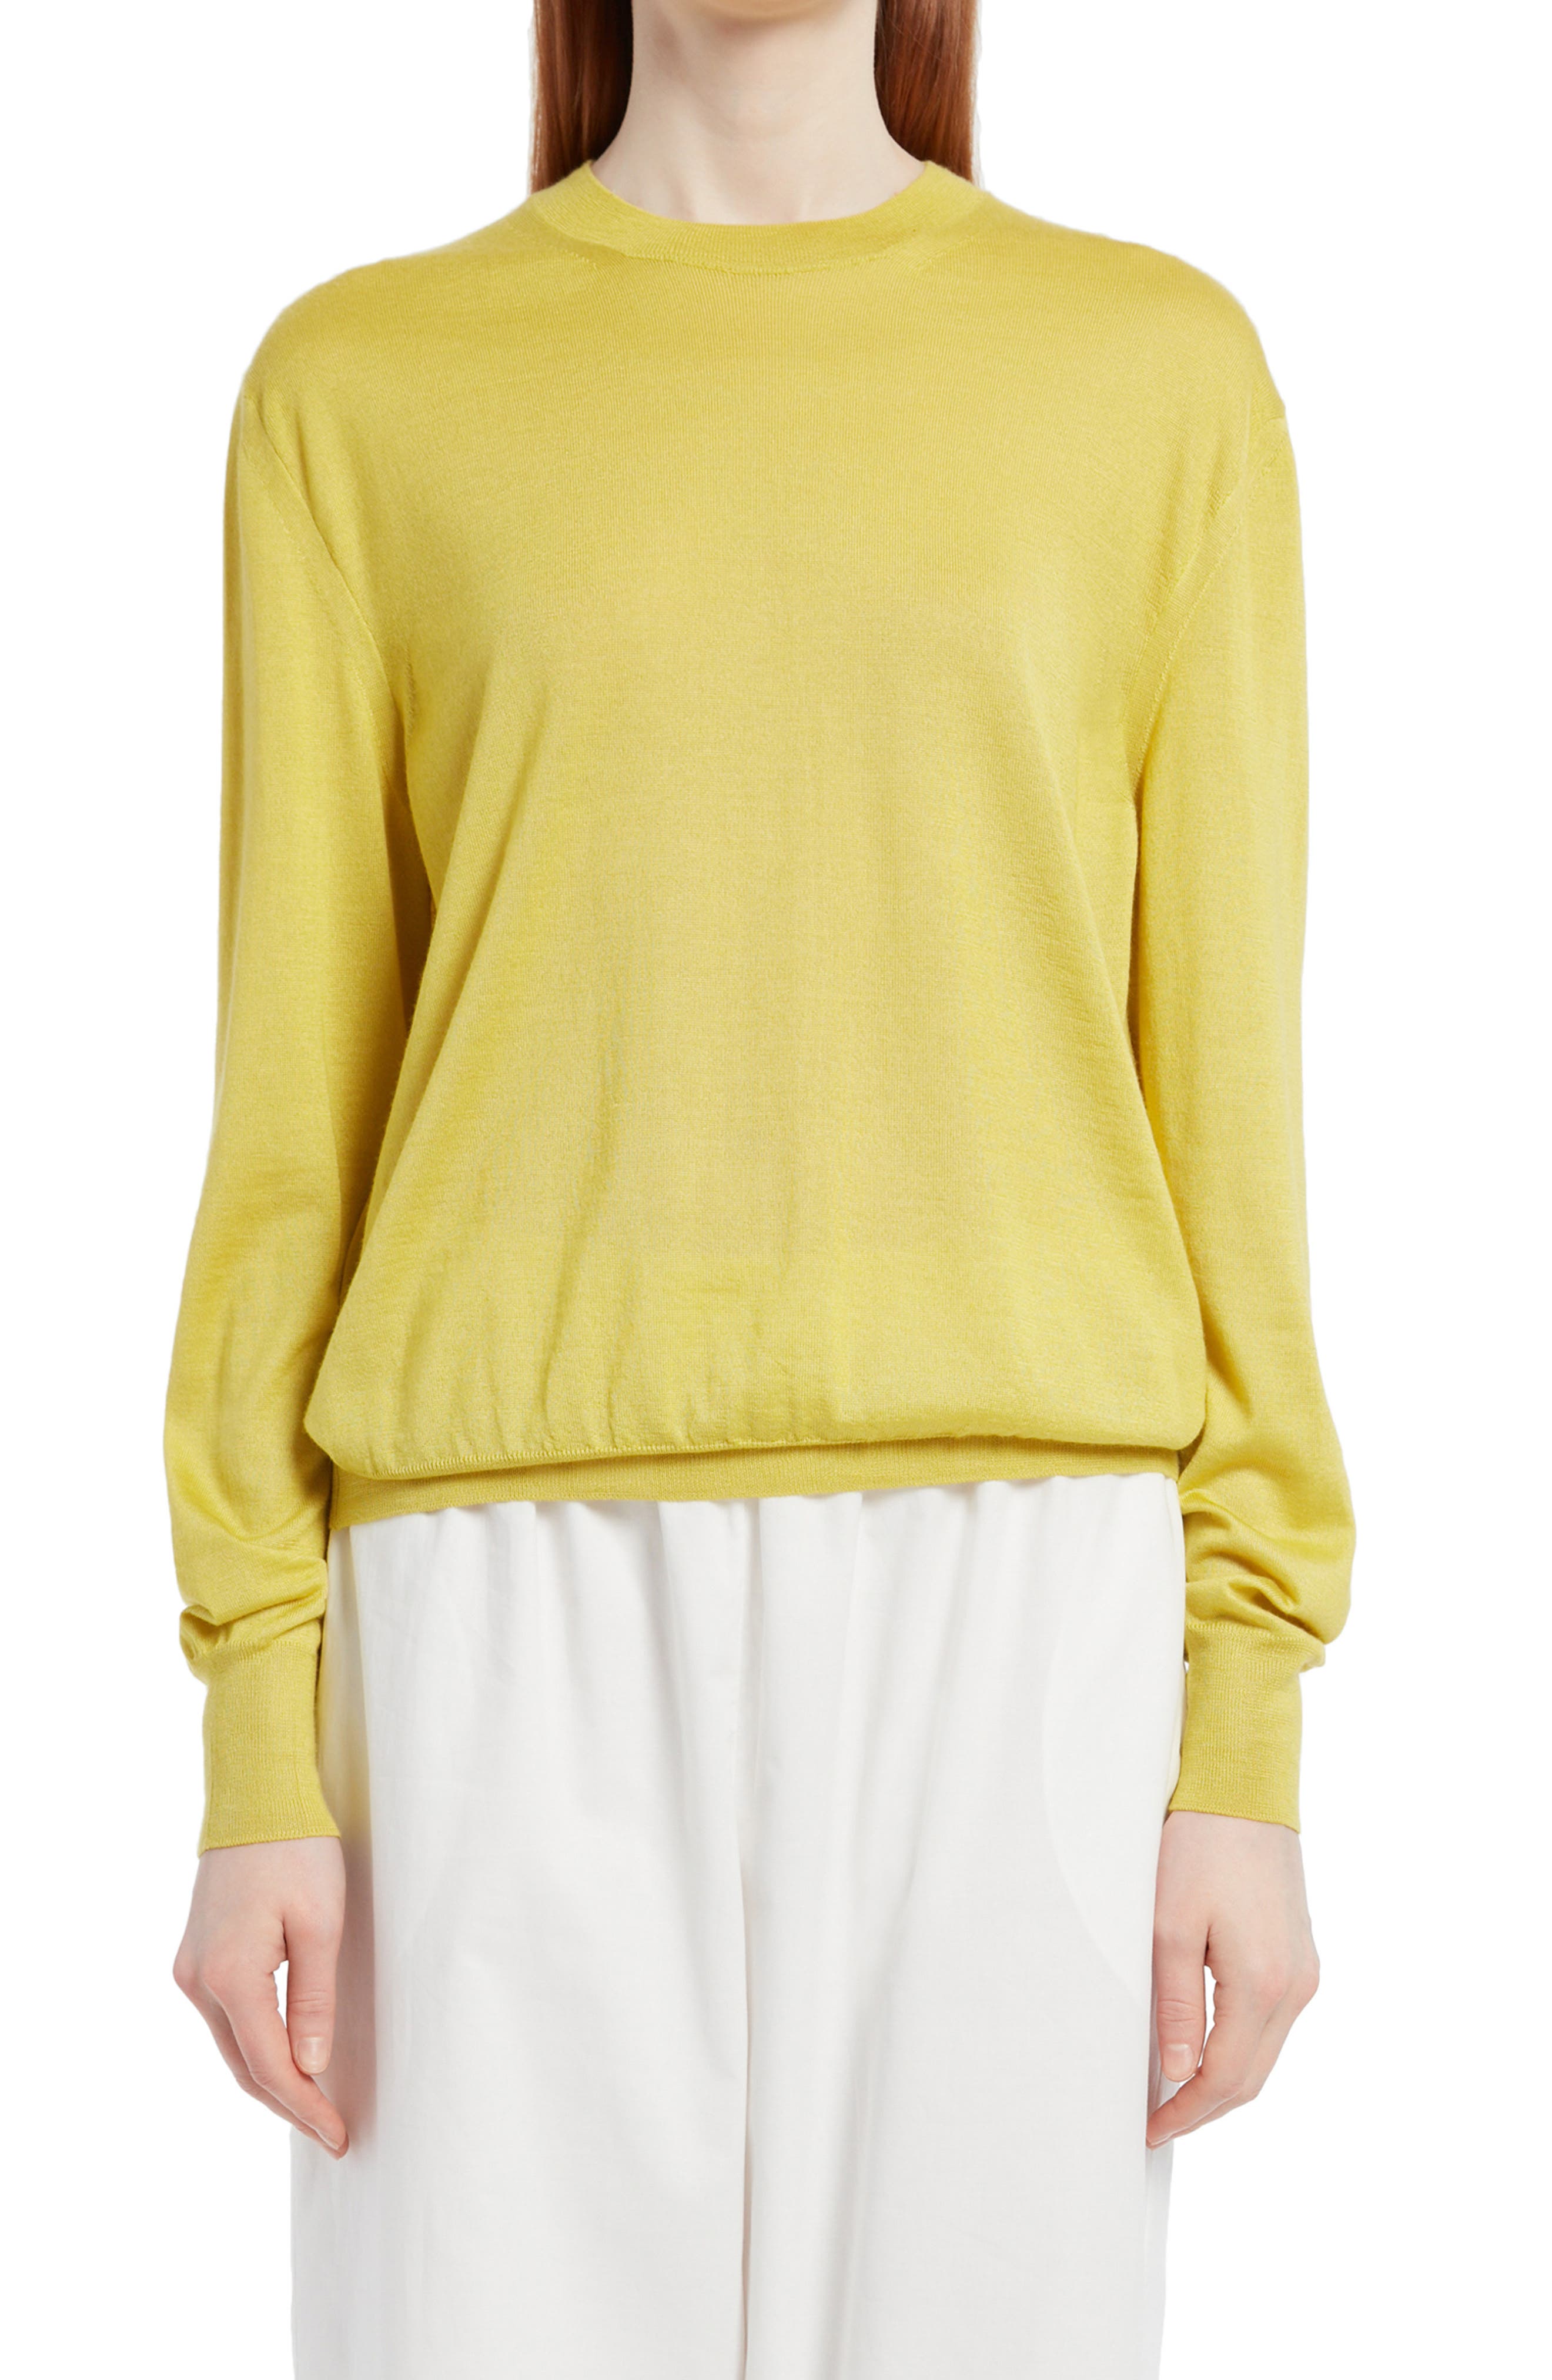 Nordstrom Women Clothing Sweaters Sweatshirts Islington Crewneck Cashmere & Silk Sweater in Chartreuse Yellow at Nordstrom 